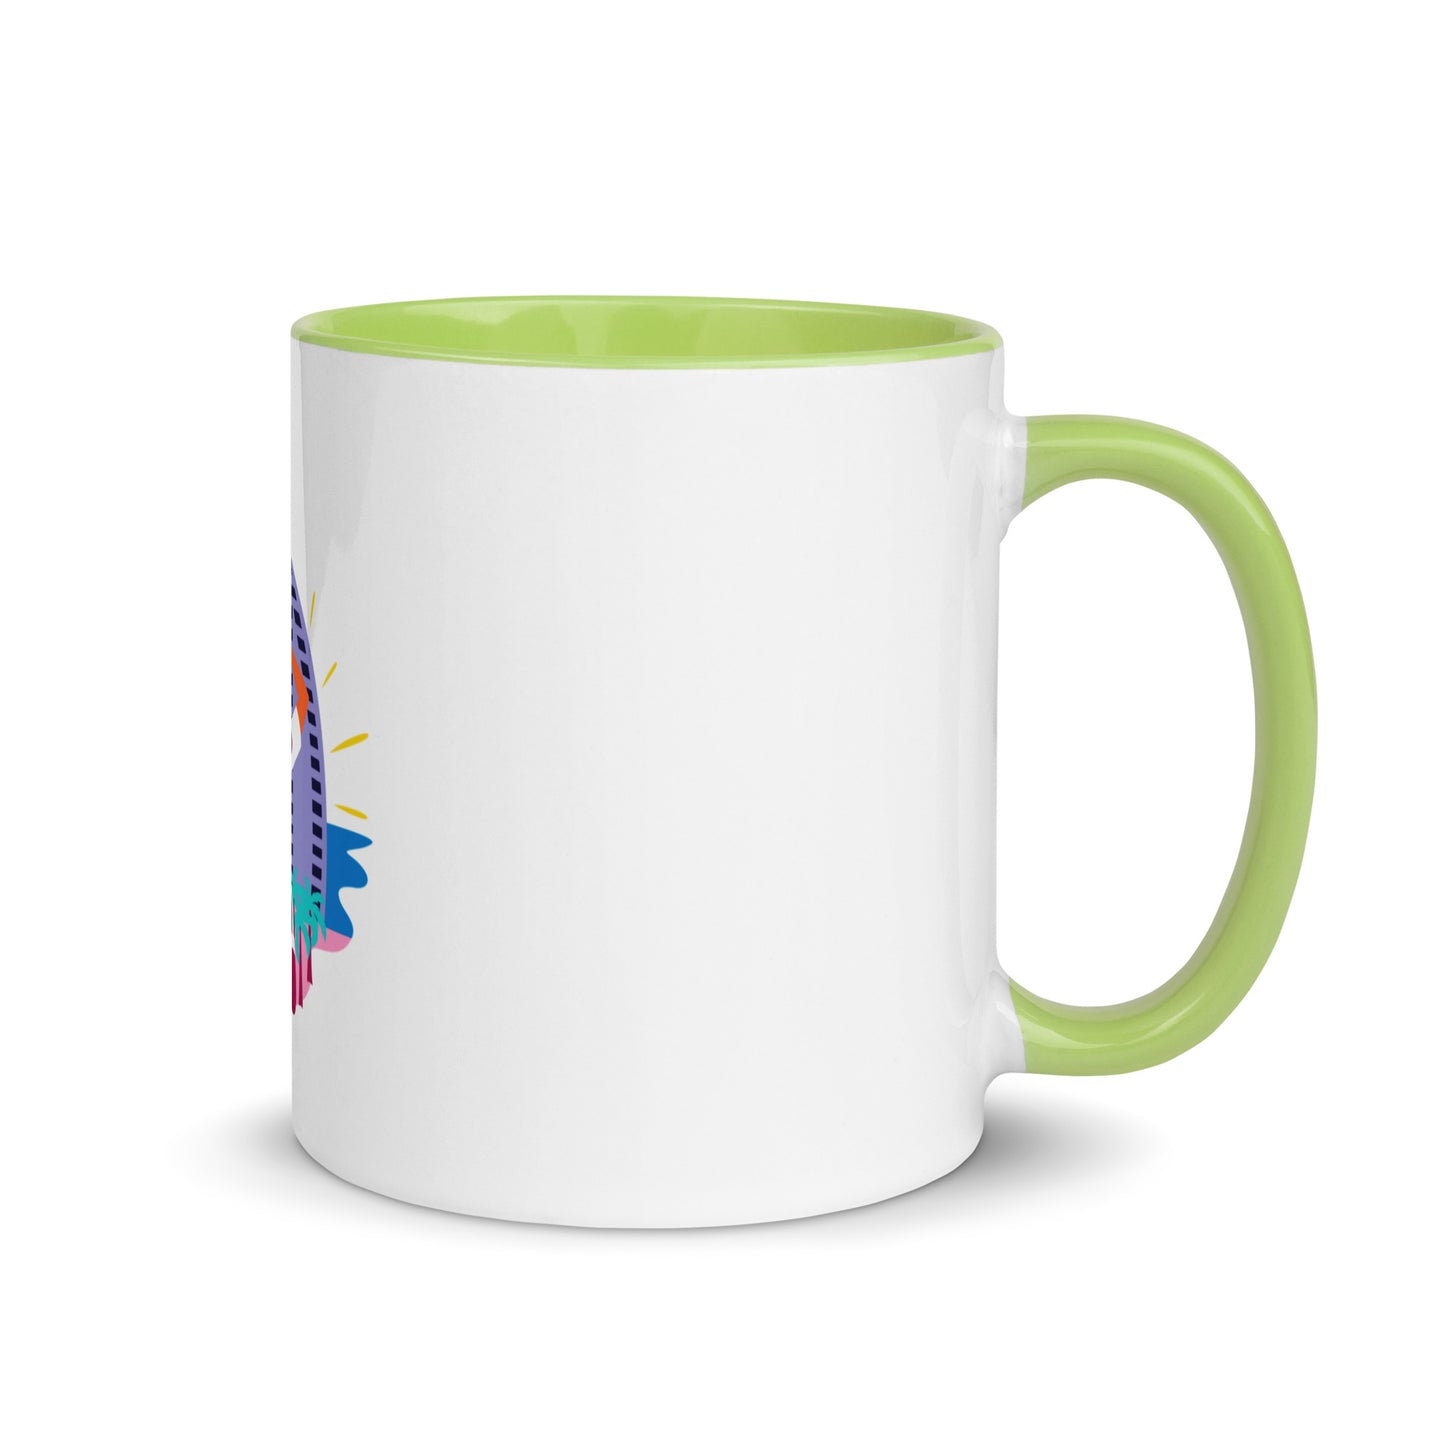 GOAL IS THE GOAL Mug with Color Inside